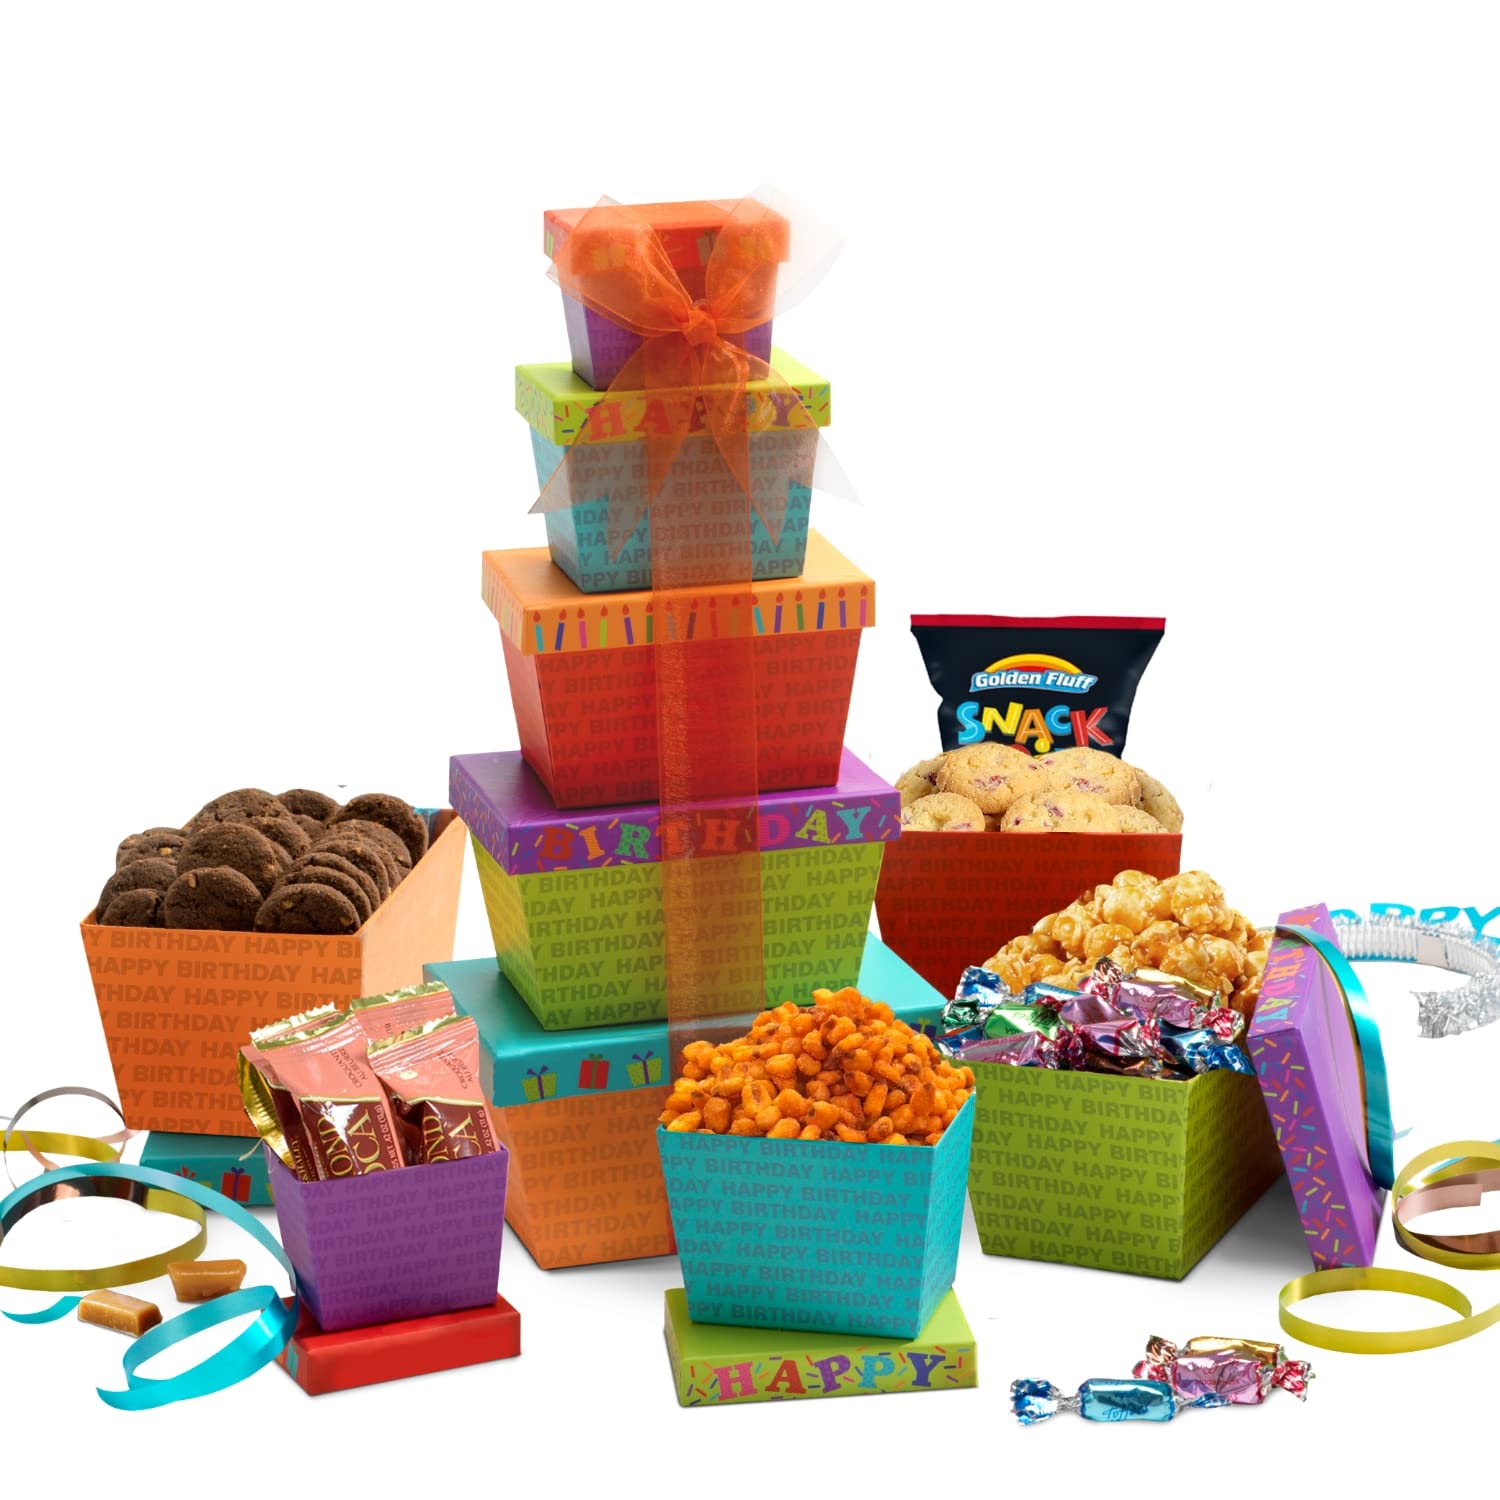 Broadway Basketeers Gourmet Food Gift Basket 6 Box Tower for Birthdays –  Curated Snack Box, Sweet and Savory Treats for Parties, Best Wishes,  Birthday